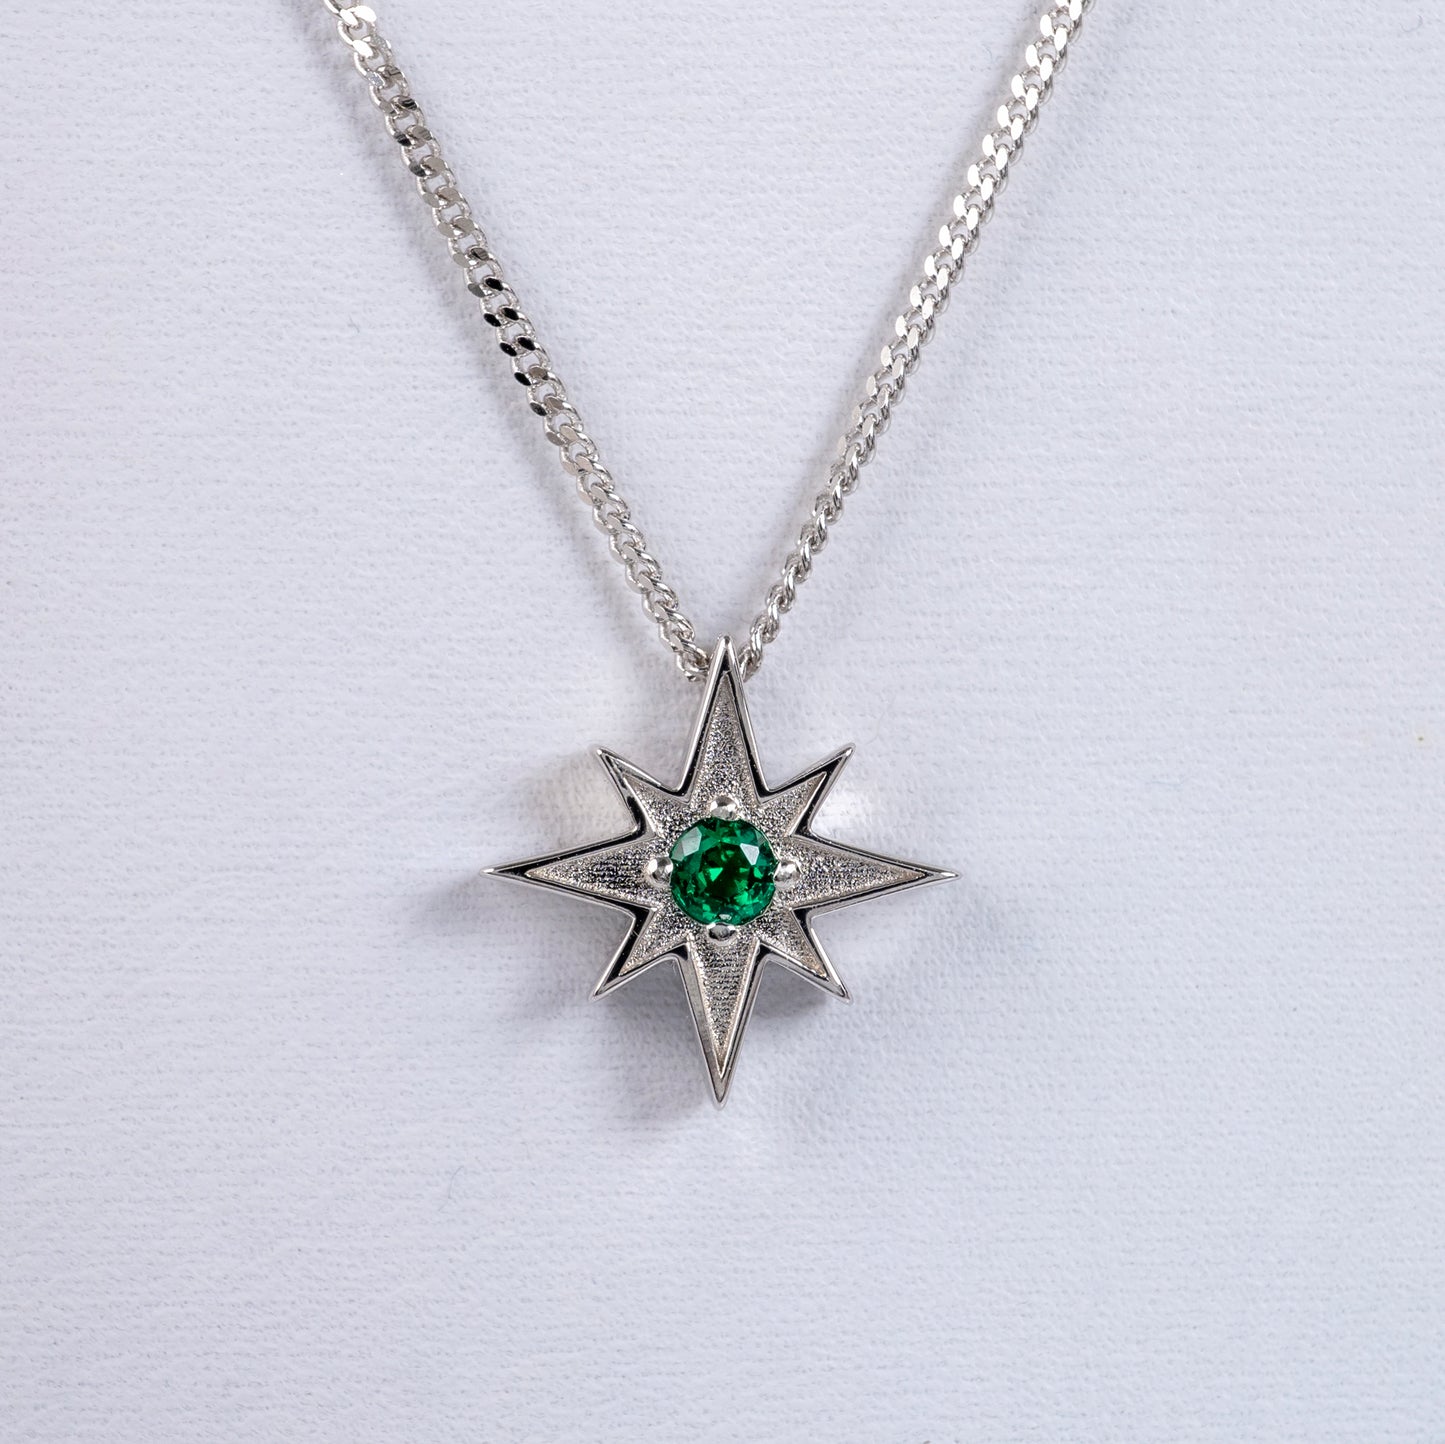 Celestial Star Necklace: 925 Silver North Star Pendant + Adjustable Curb Chain (40-45cm)